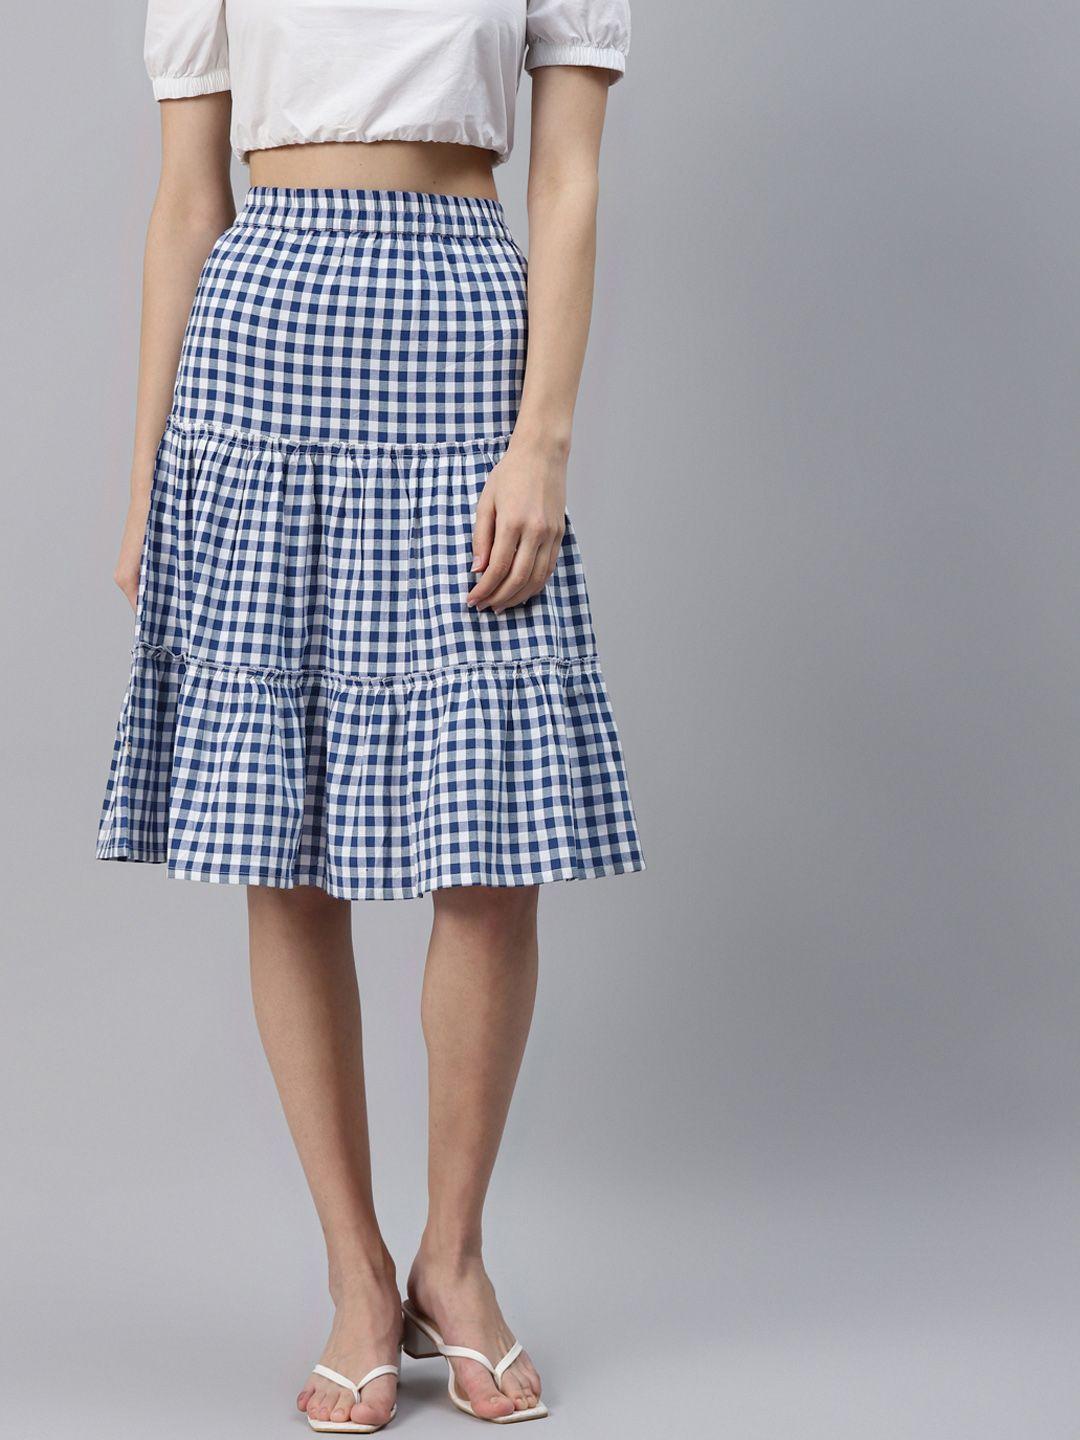 fabnest blue & white gingham checks pleated ruffles casual flared tiered skirt